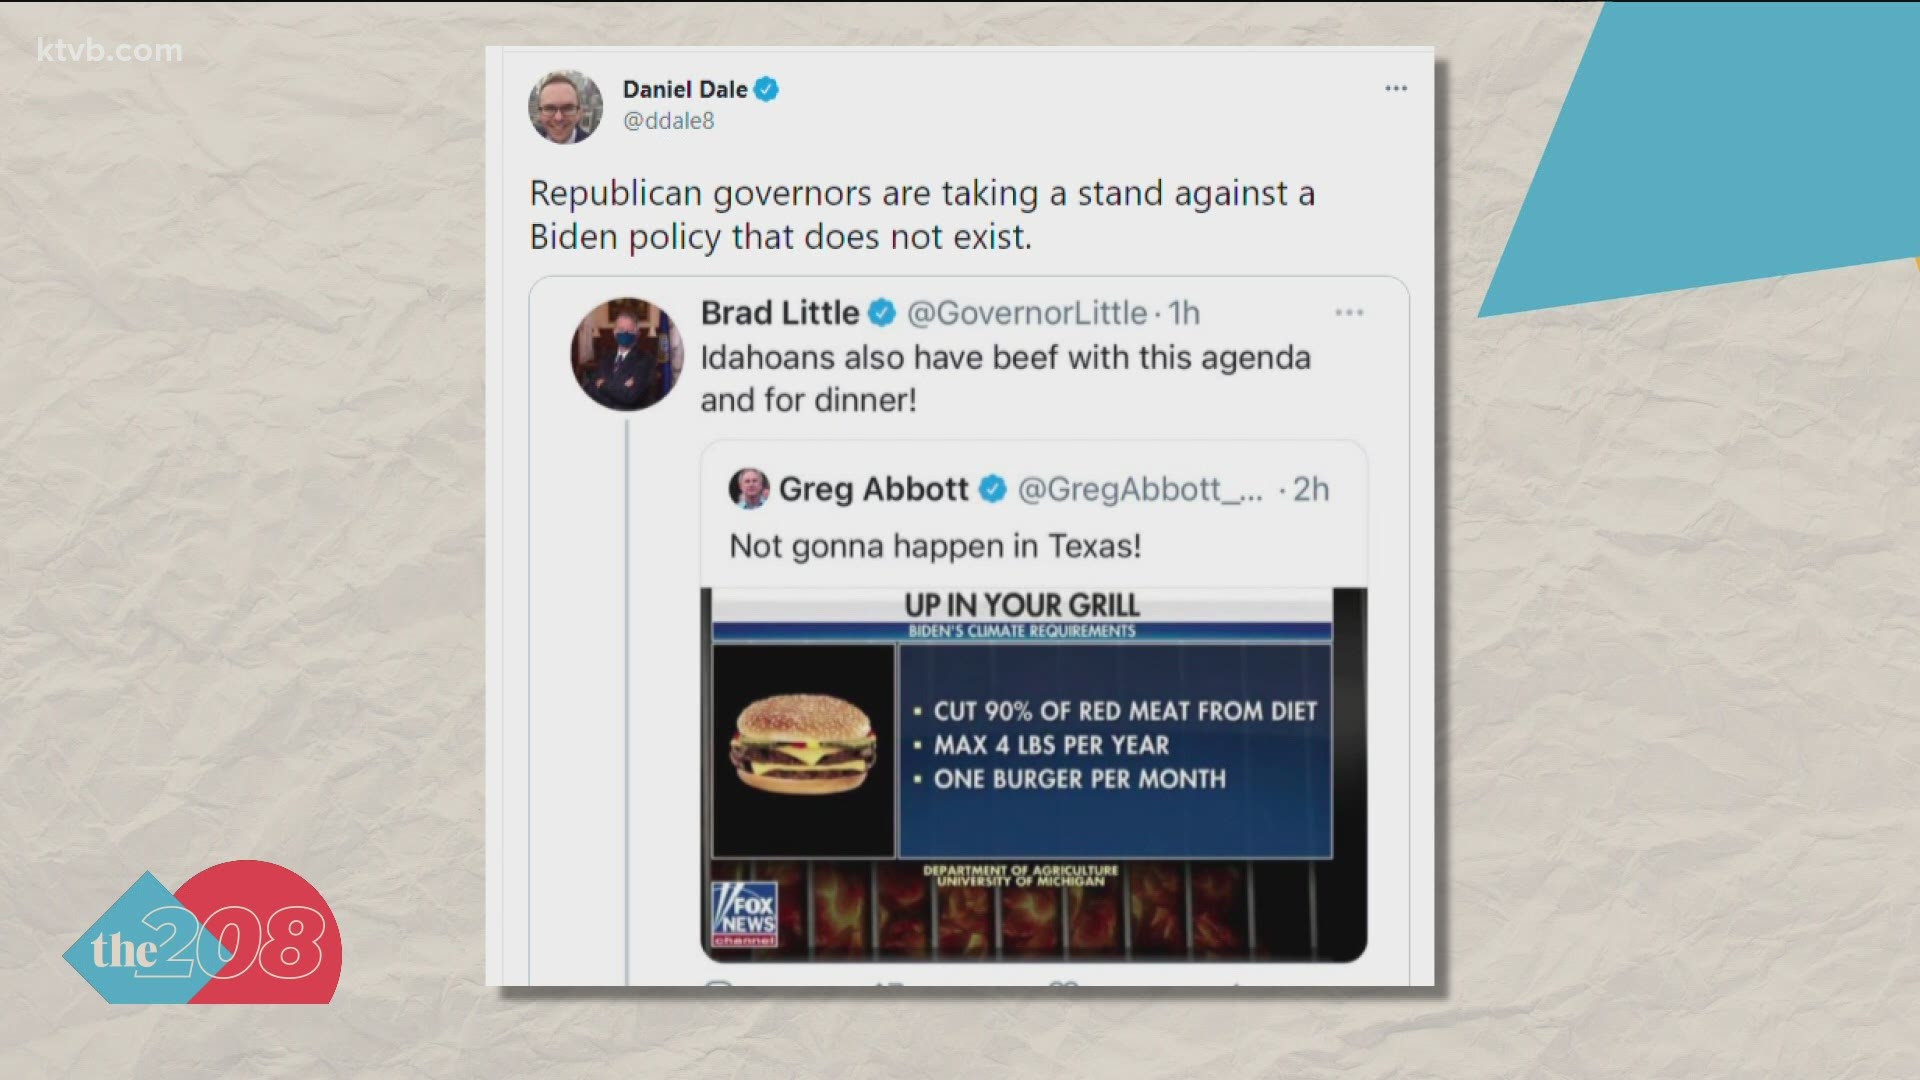 Gov. Little tweeted "Idahoans also have beef with this agenda" in response to a Fox News graphic about Biden's climate plan. Problem is, it's not a real policy.